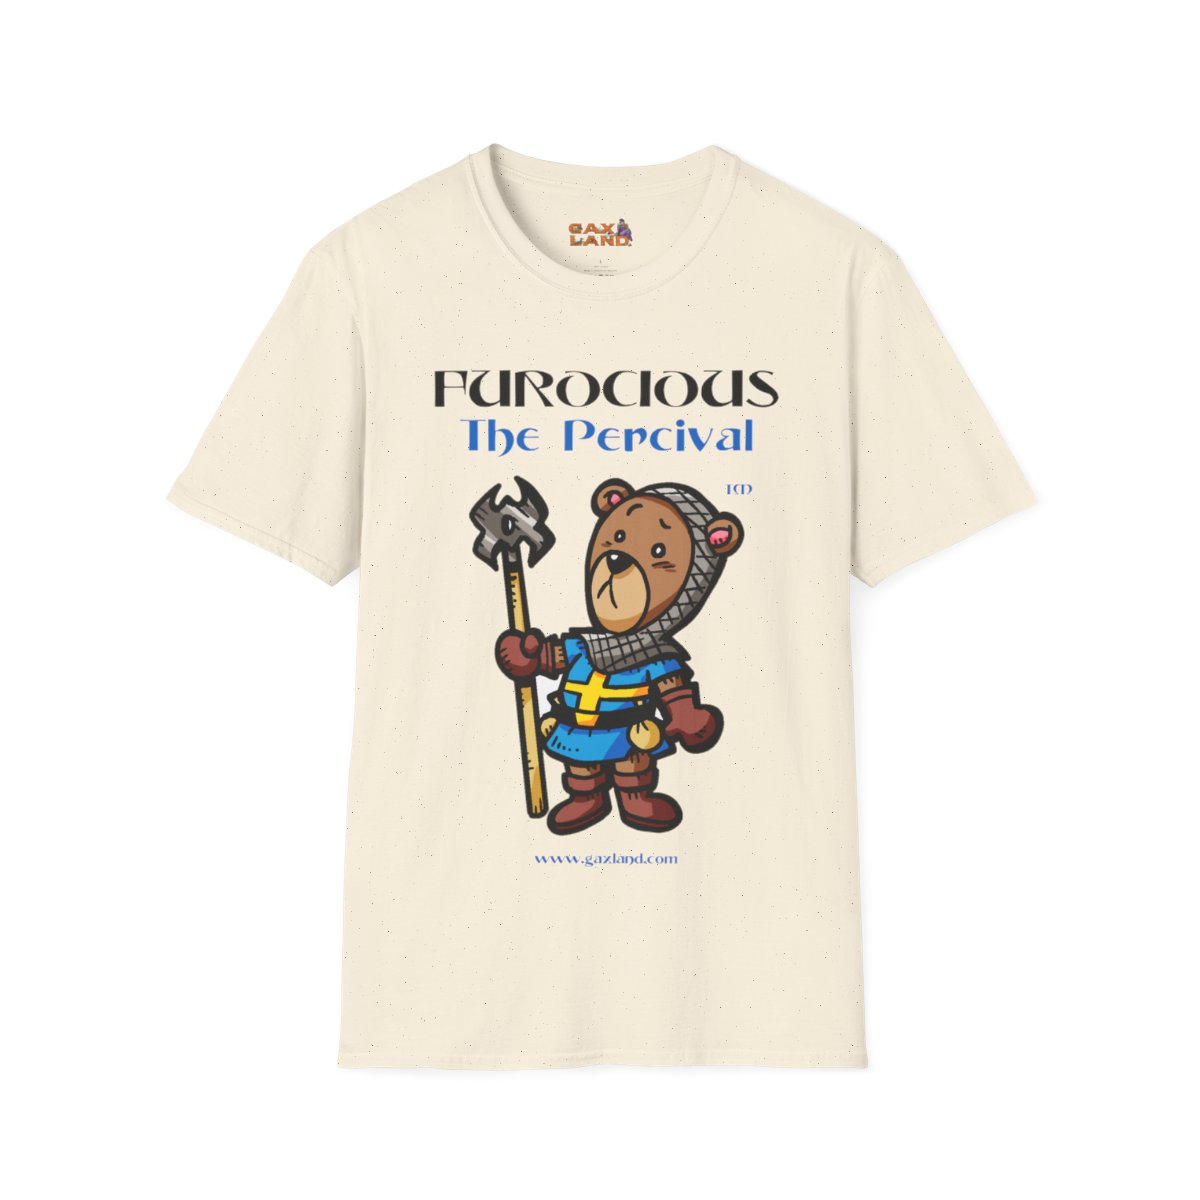 The PERCIVAL Cleric Warrior Teddy Bear T-Shirt from the FURocious Game by GAXLAND  product thumbnail image